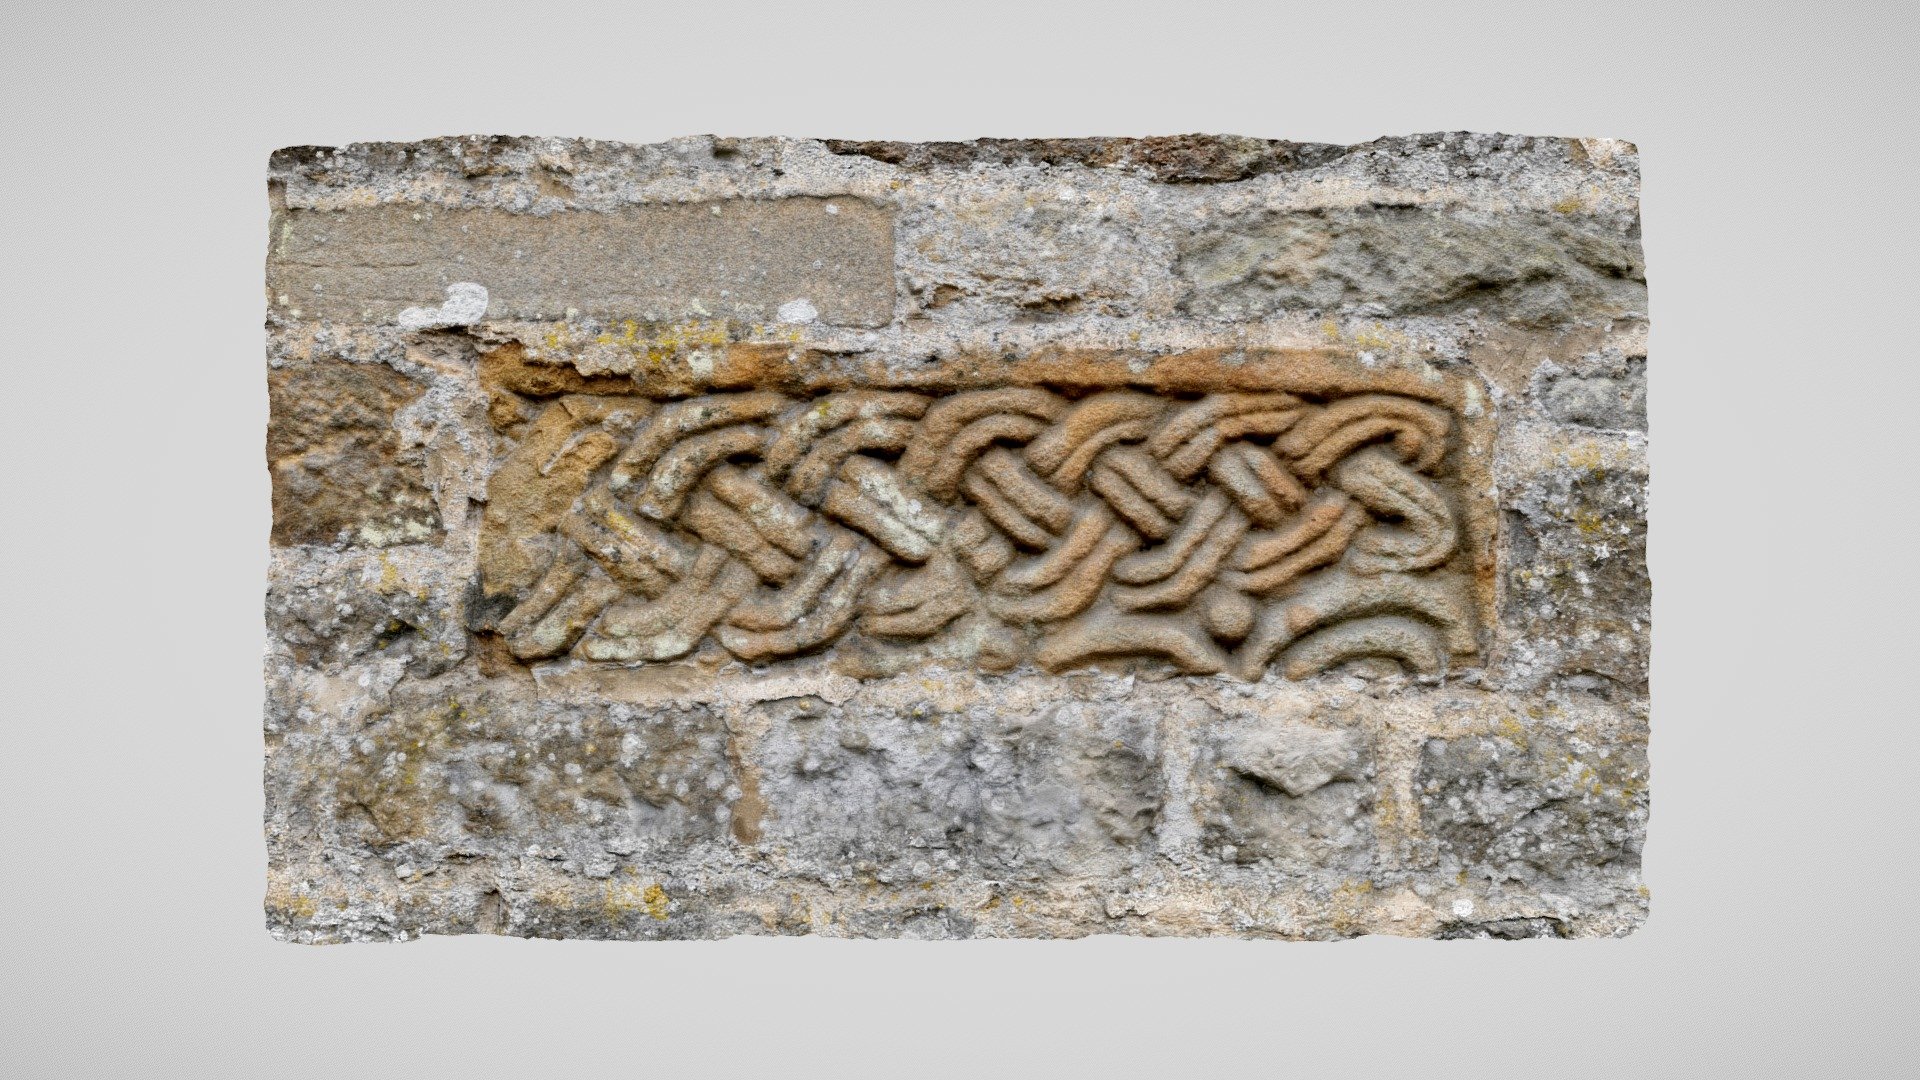 Anglo-Saxon Interlace | St. Gregory's Minster